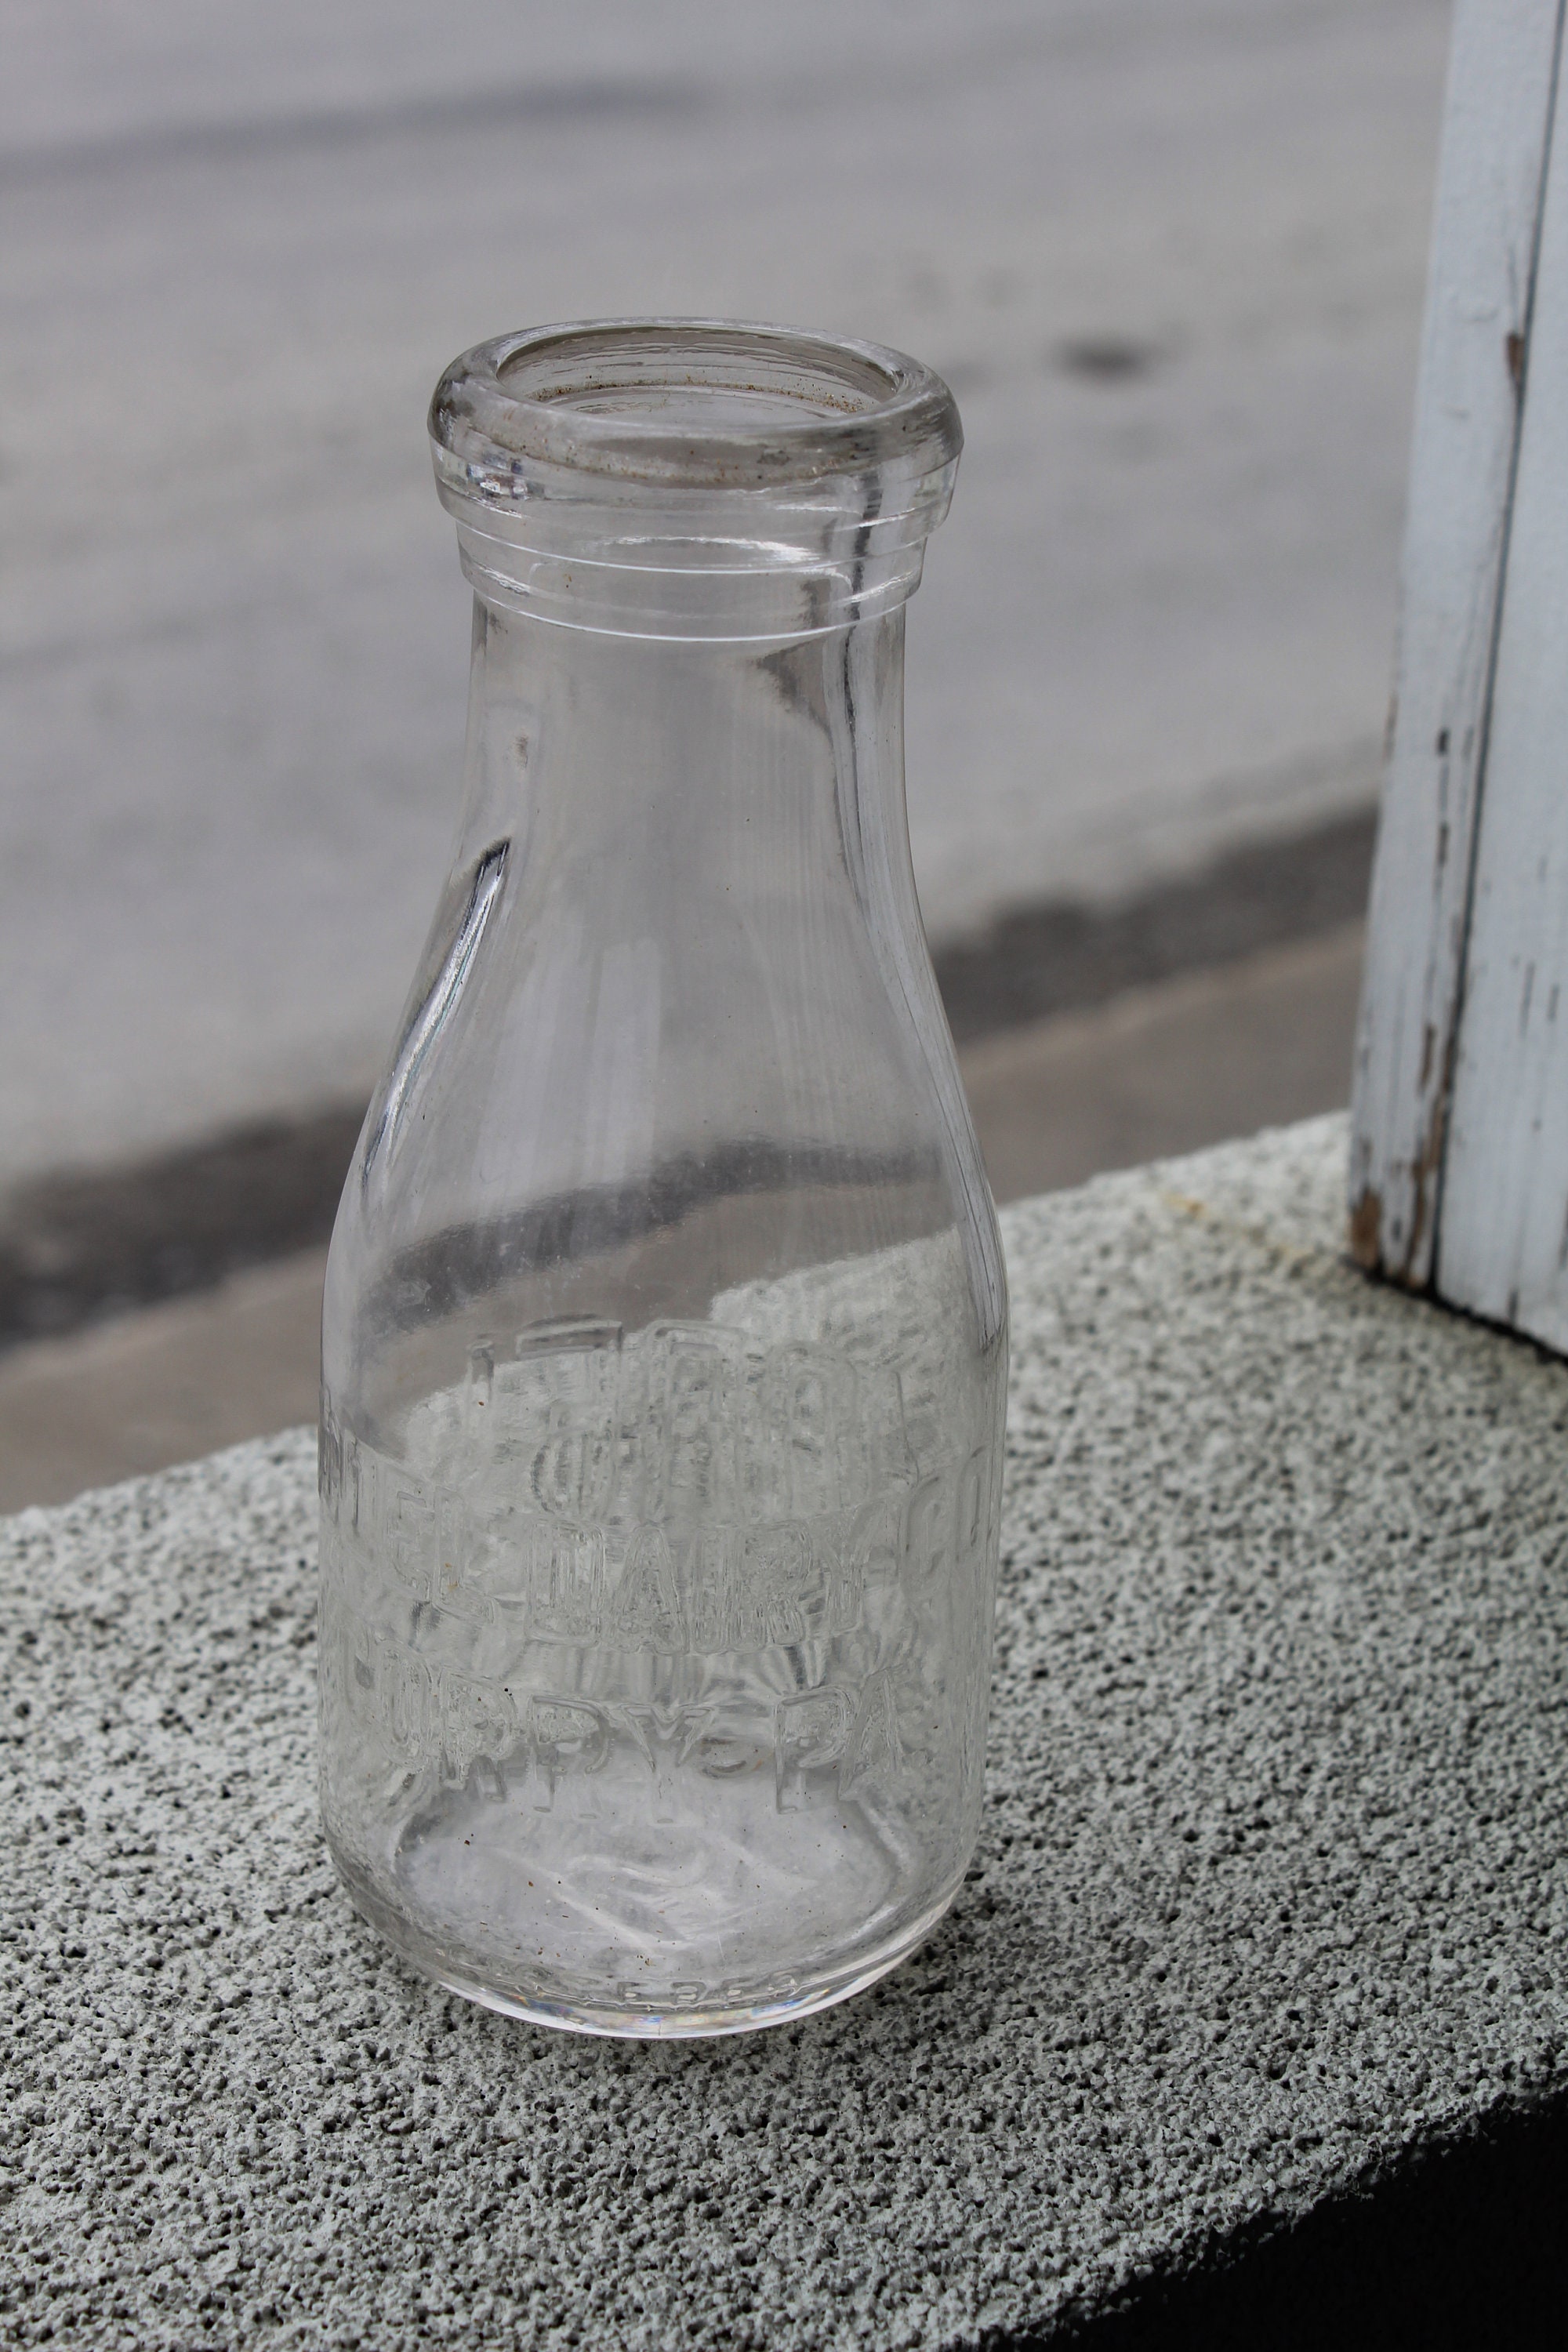 Vintage Clear Glass Milk Bottle With Cap, Always Ahead Famous Dairy,  General Store Bottles, Country Rustic, Modern Farmhouse Home Accents 